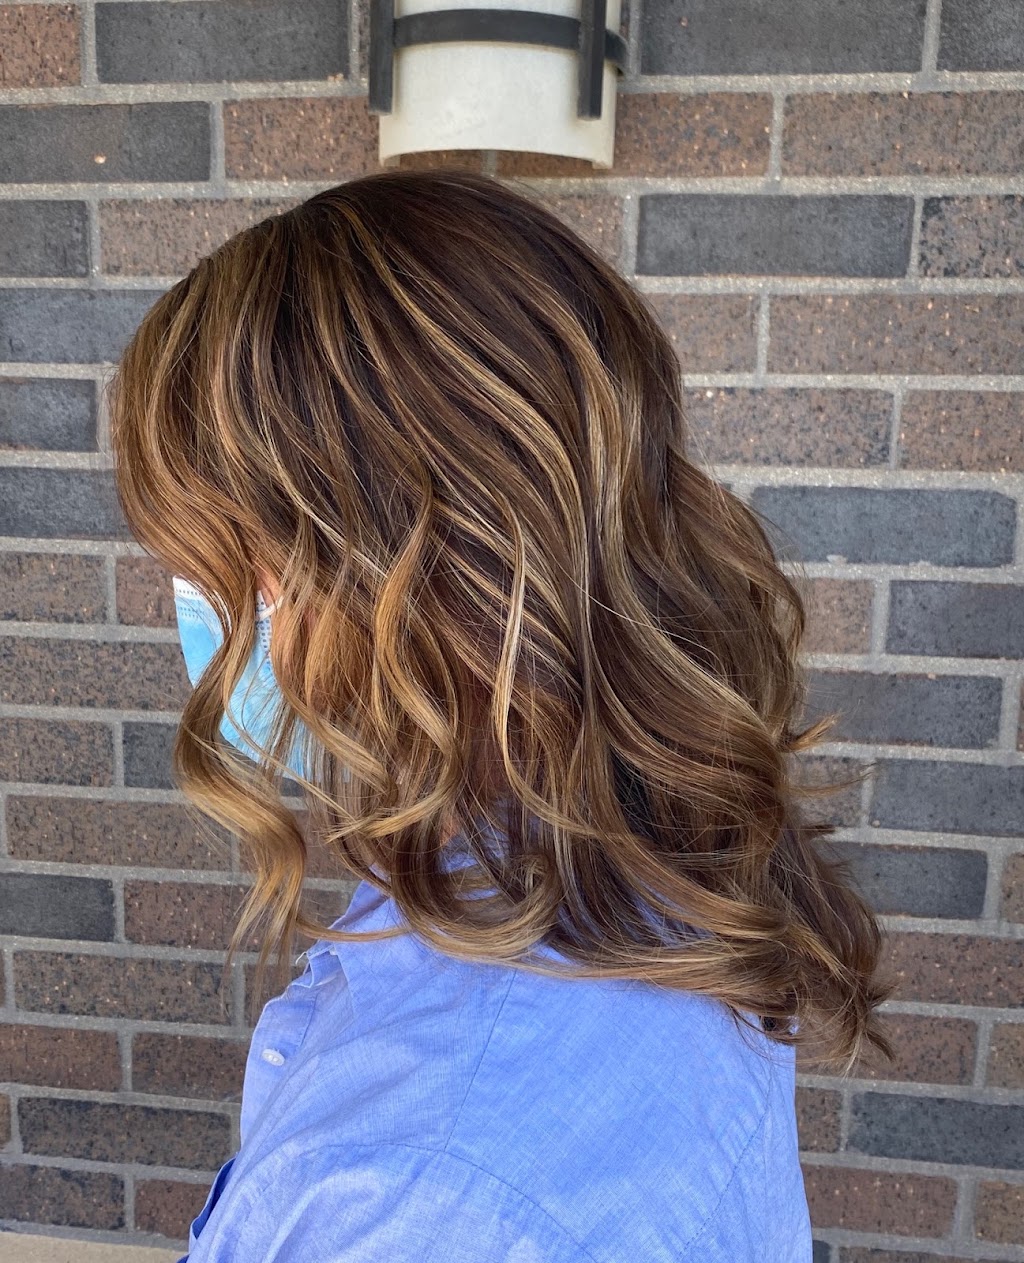 Hair by Stephanie Anne | 17110 W Greenfield Ave Suite 4, Brookfield, WI 53005 | Phone: (262) 765-3414